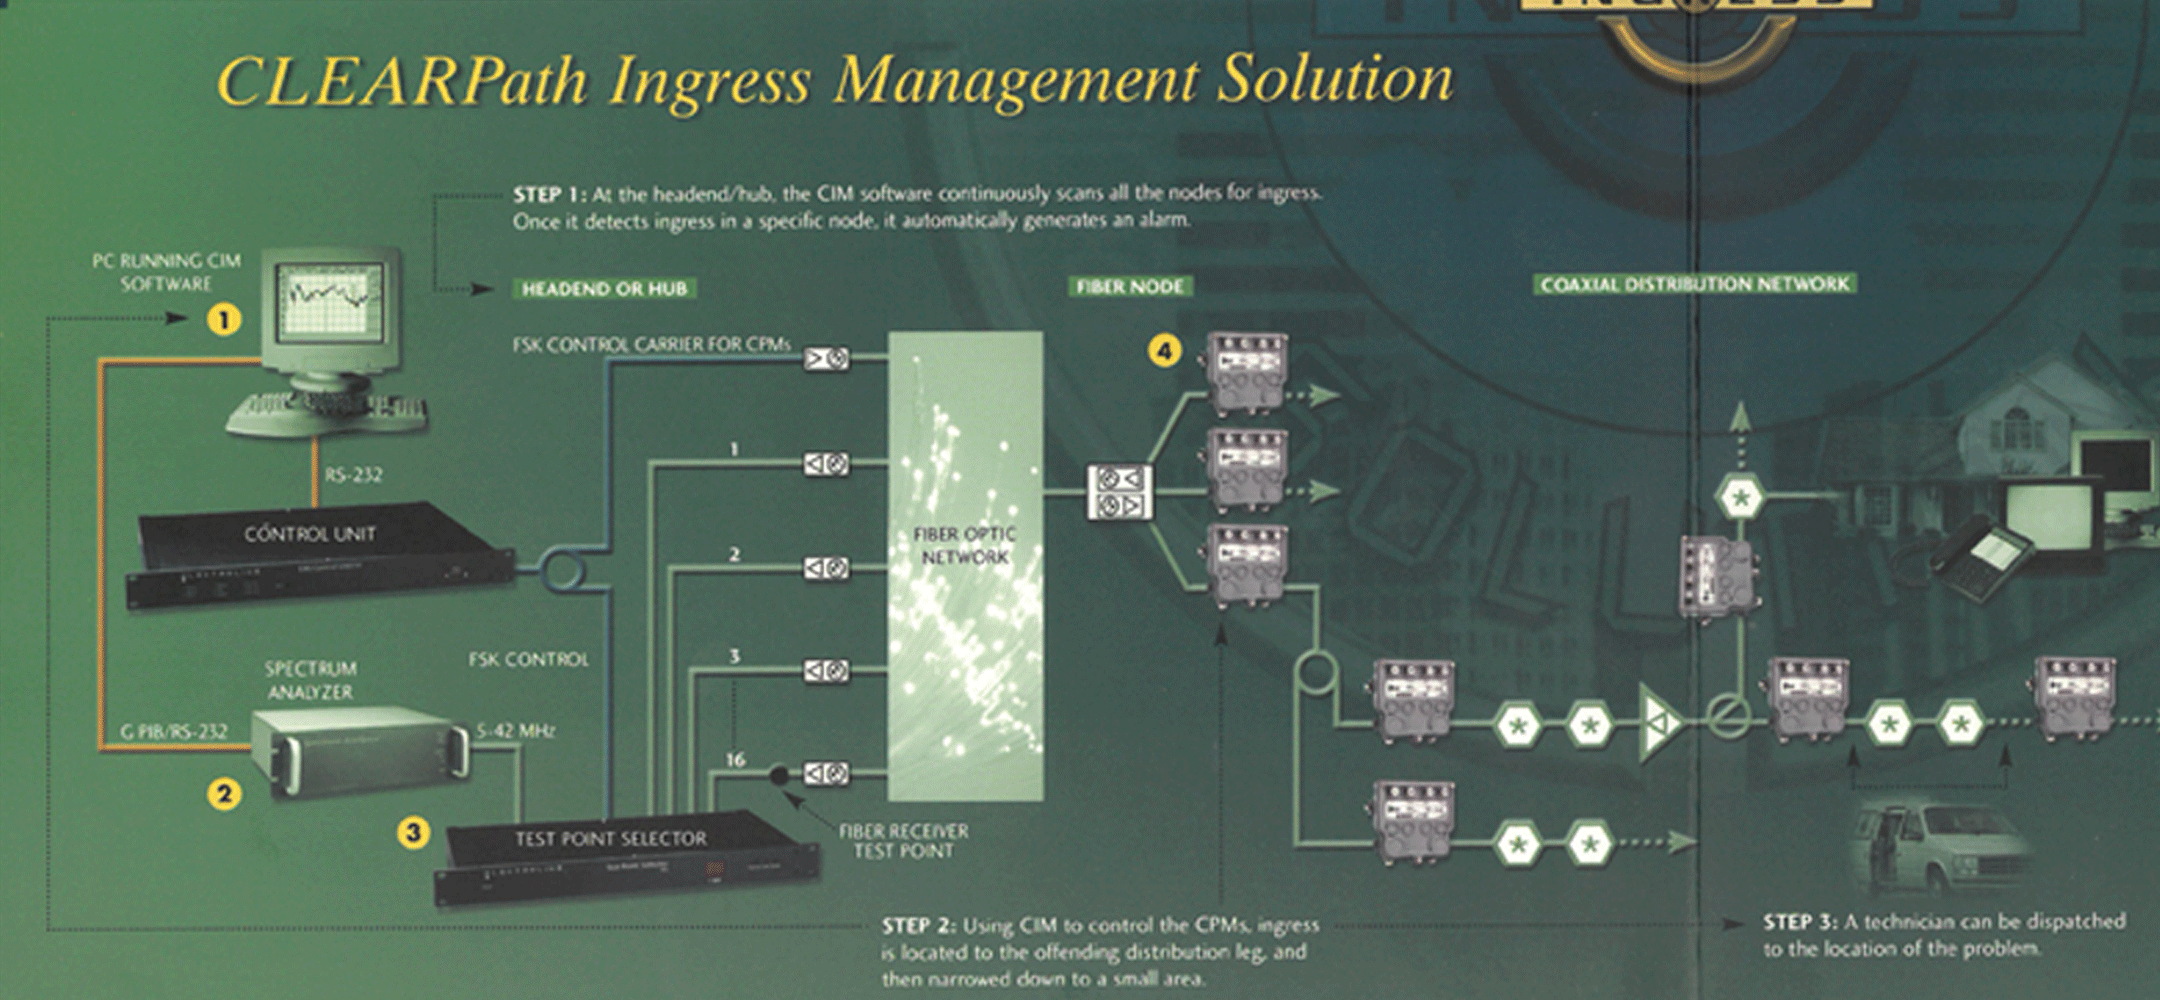 Pictures-for-Ingress-management-Solutions